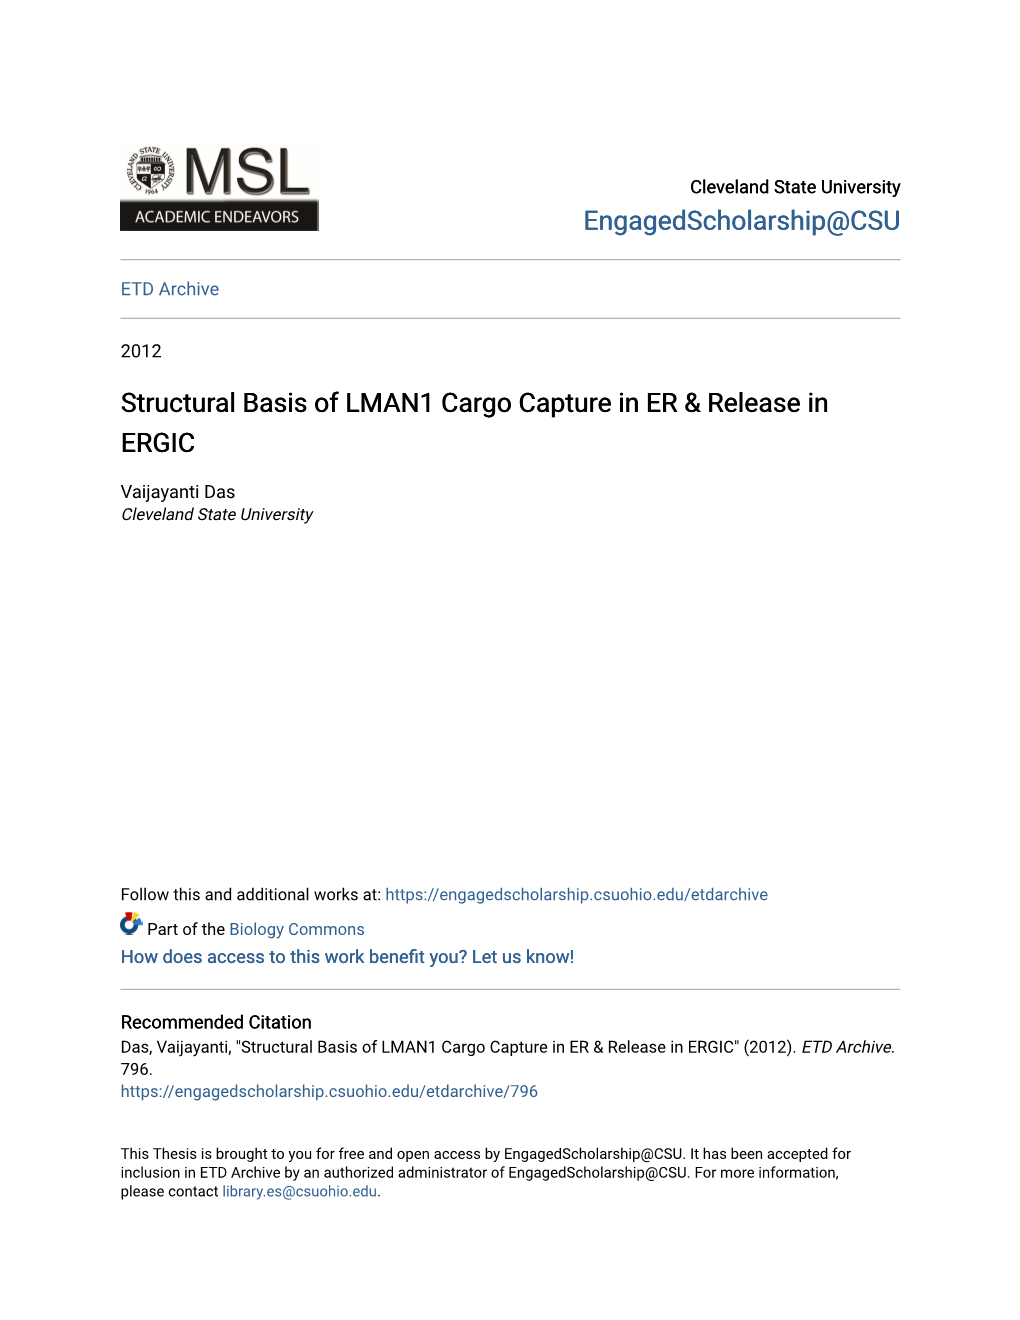 Structural Basis of LMAN1 Cargo Capture in ER & Release in ERGIC